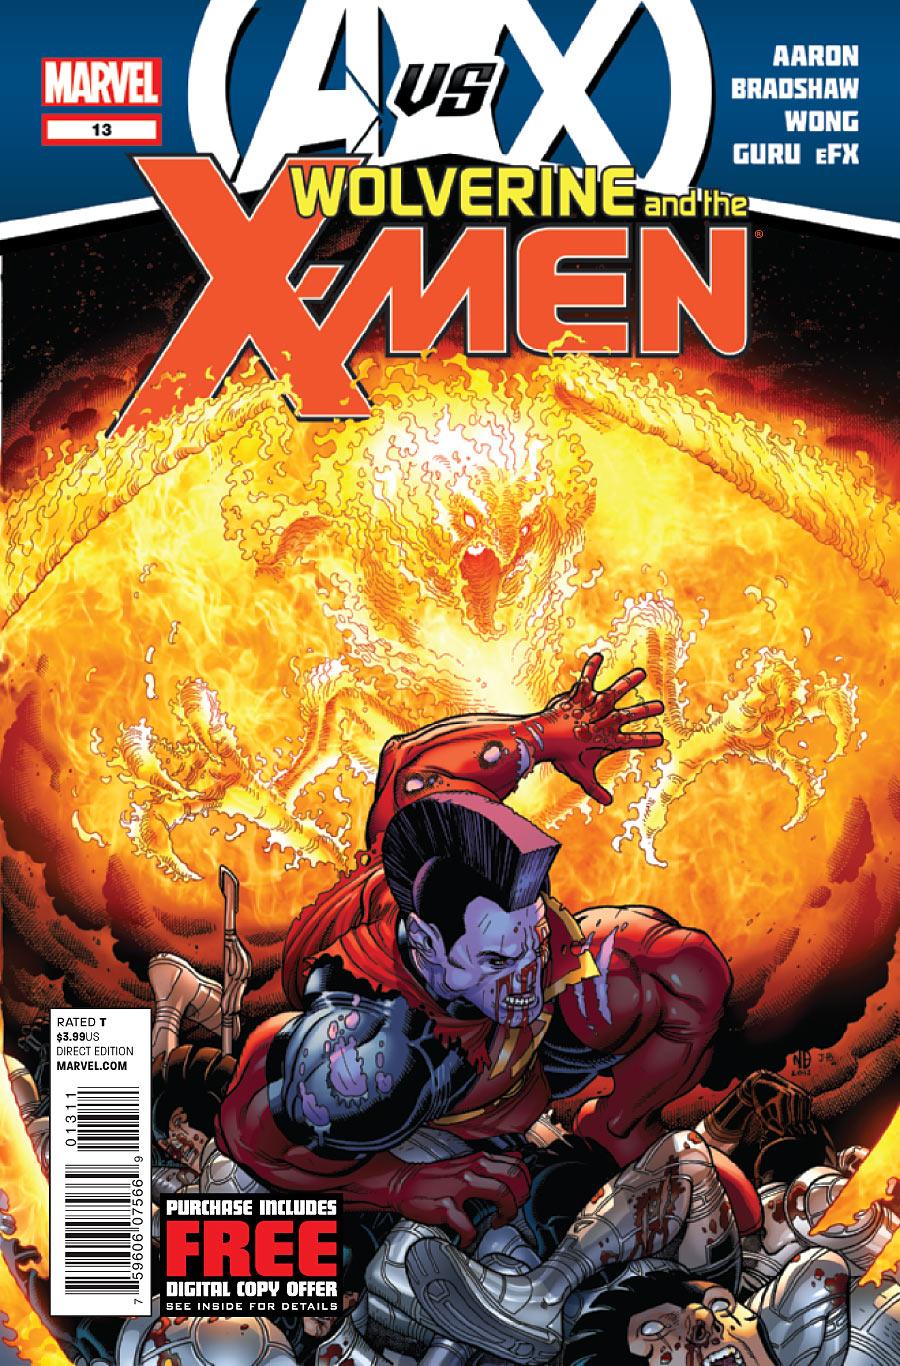 Wolverine and the X-Men Vol. 1 #13